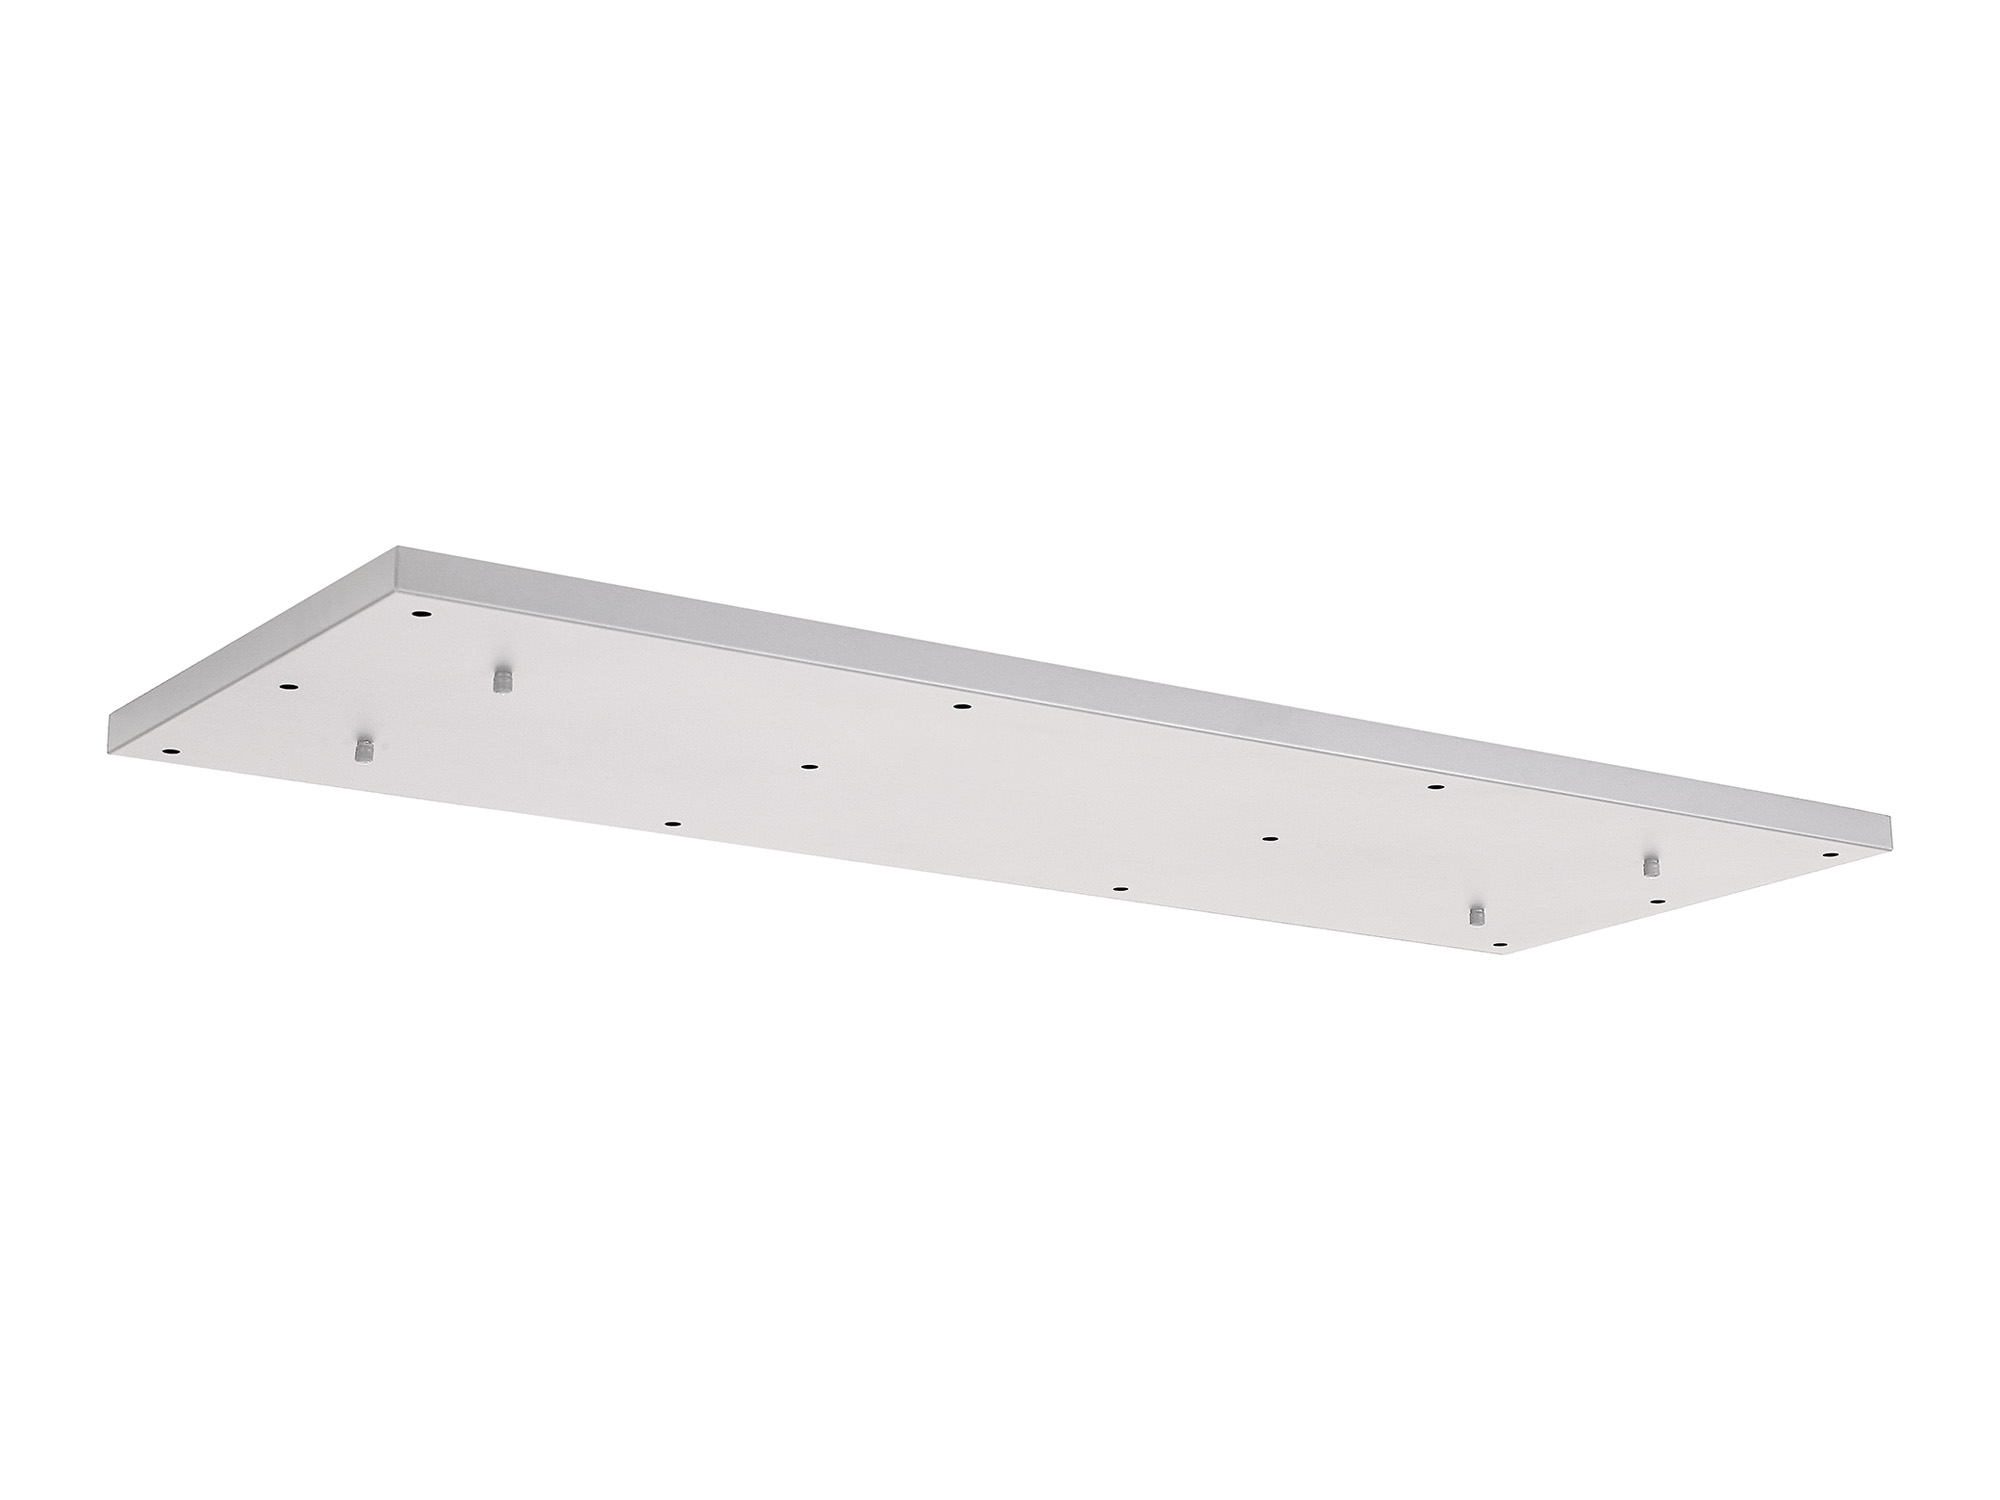 D0889WH  Hayes 12 Hole 1100mm x 400mm Linear Rectangle Ceiling Plate White